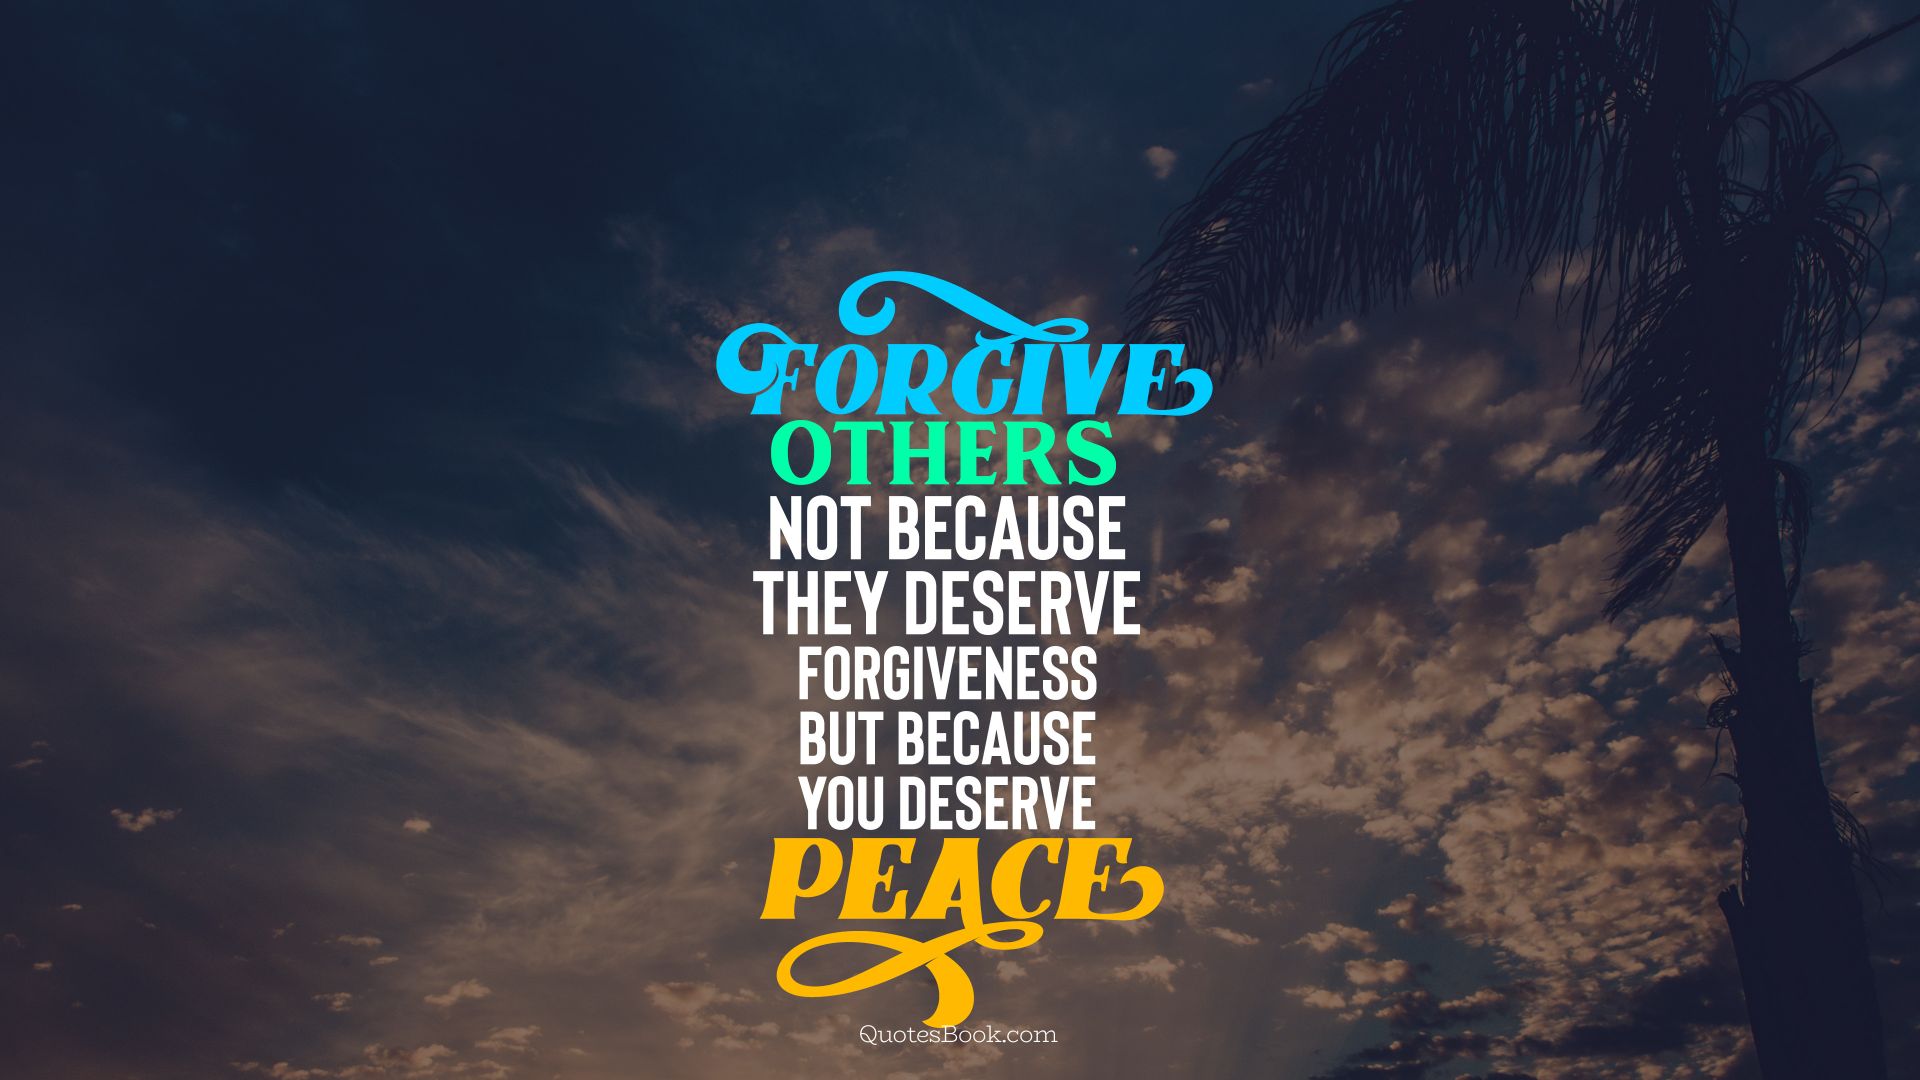 Forgive others not because they deserve forgiveness but because you deserve peace